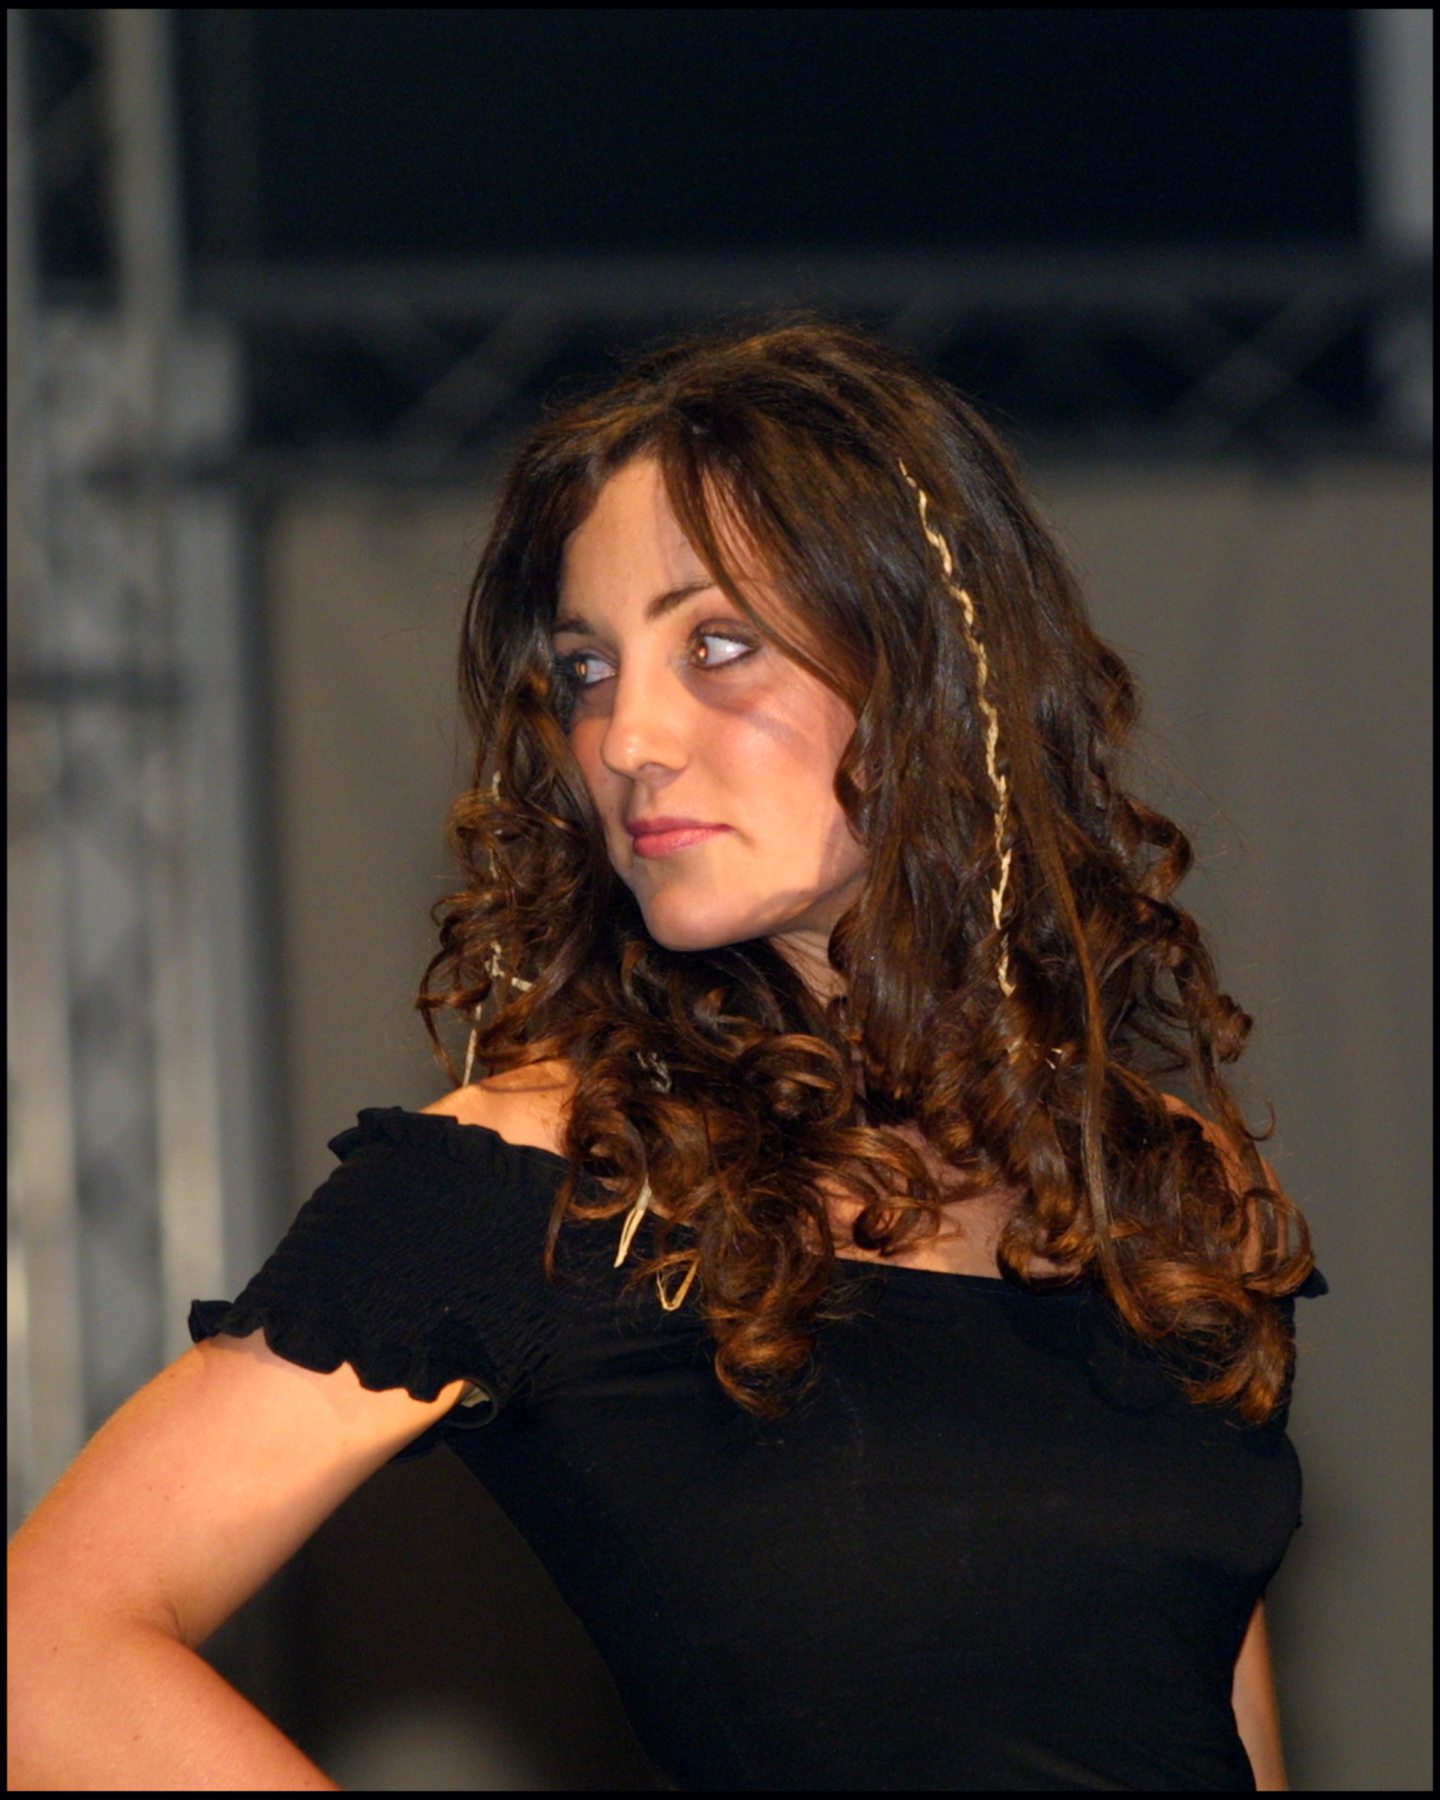 Another of Walter's pictures of Kate Middleton at 2002 Don't Walk fashion show in St Andrews